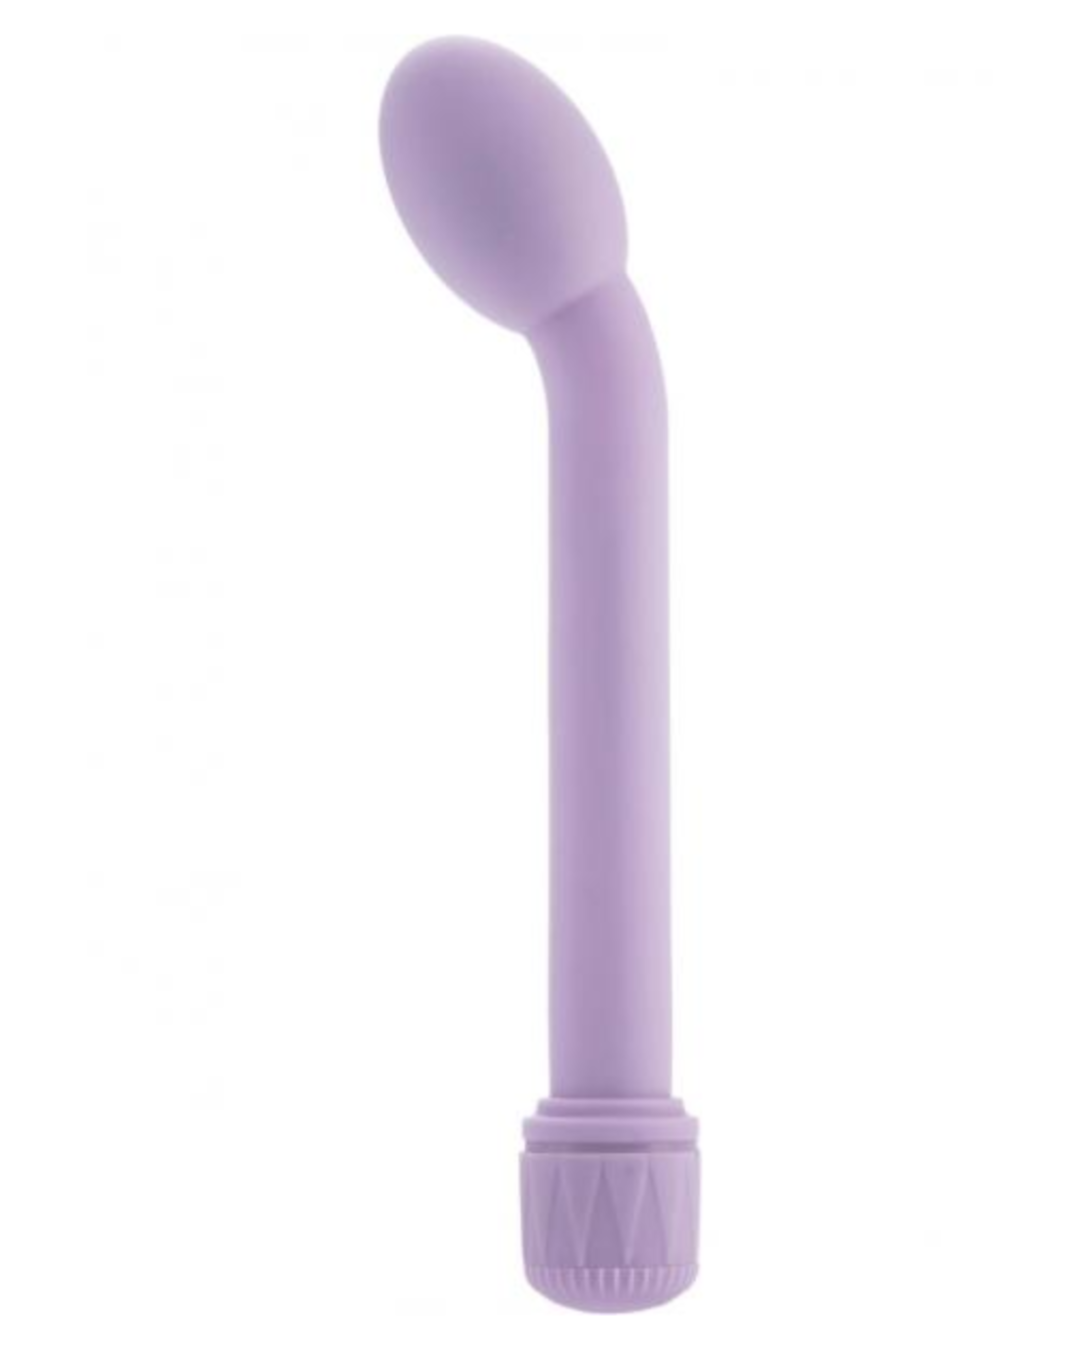 First Time G-Spot Tulip Vibrator by Cal Exotics - Assorted Colors purple